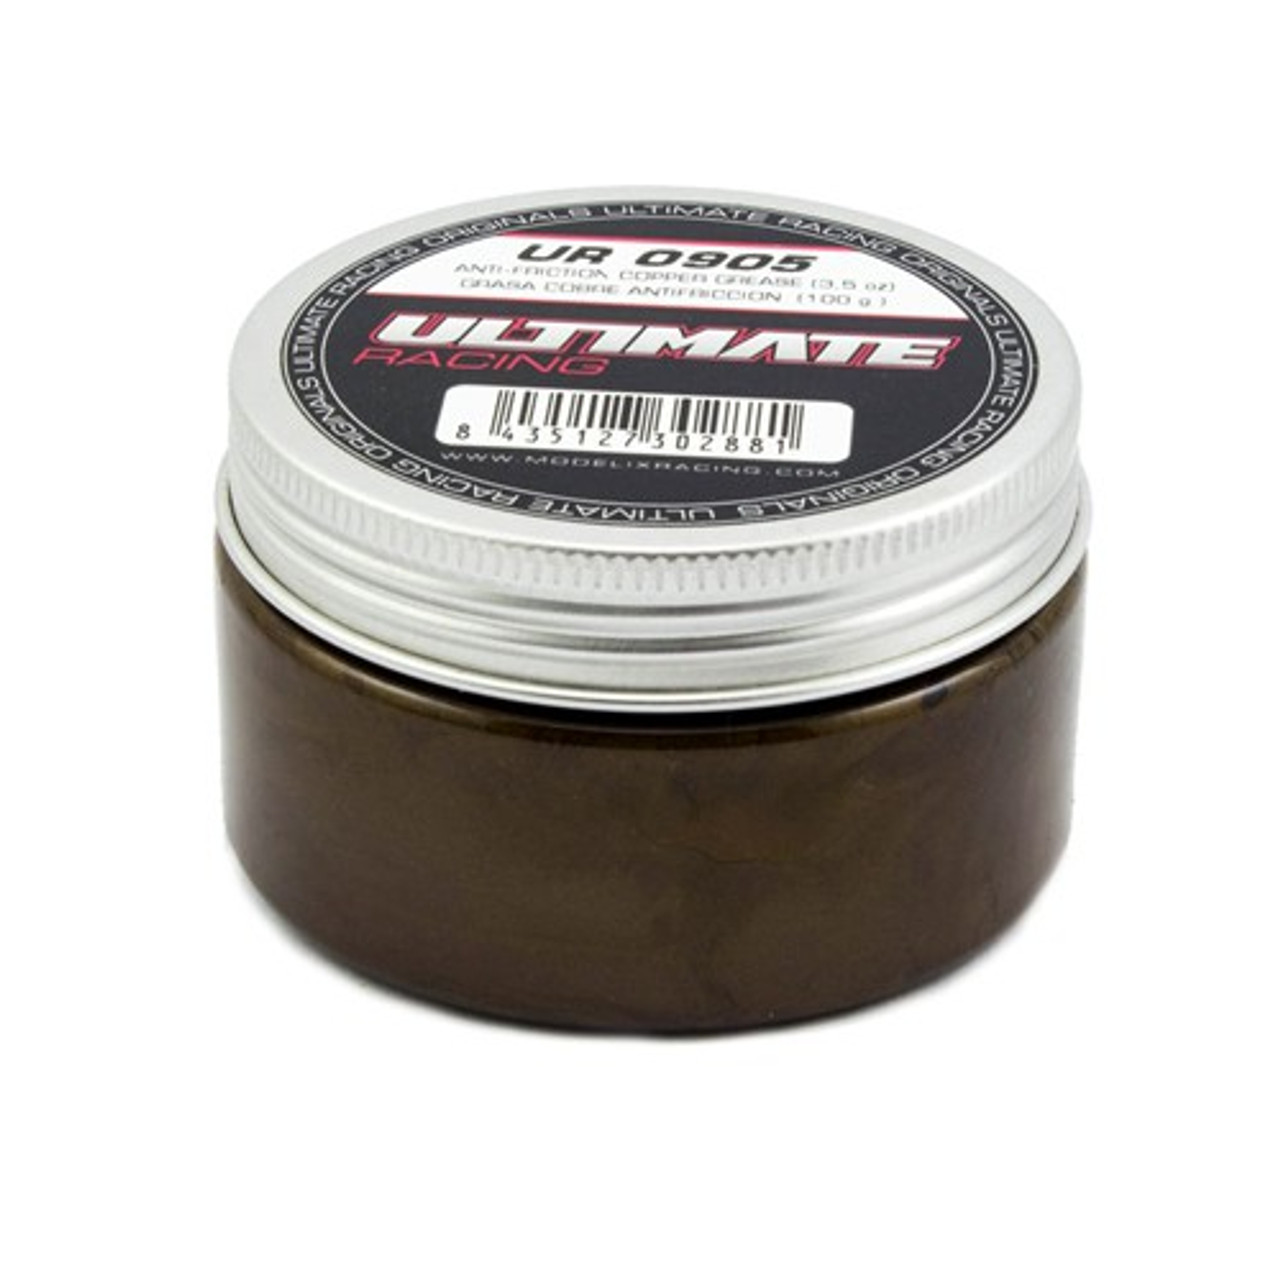 Ultimate Racing Anti-Friction Copper Grease (3.5oz) (UR0905)